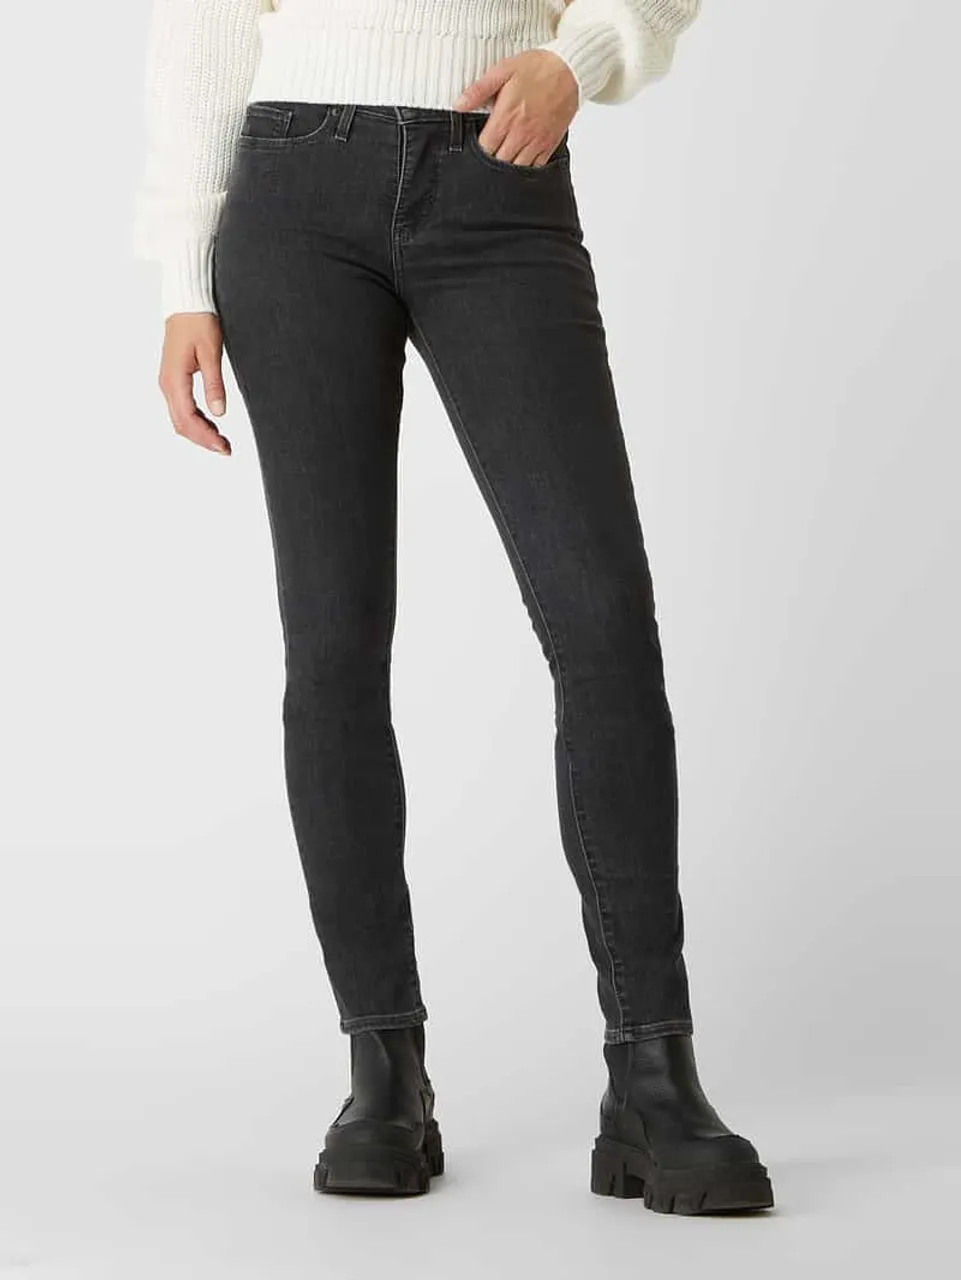 Levi's® 300 Shaping Skinny Fit Jeans mit Stretch-Anteil Modell '511' in Dunkelgrau